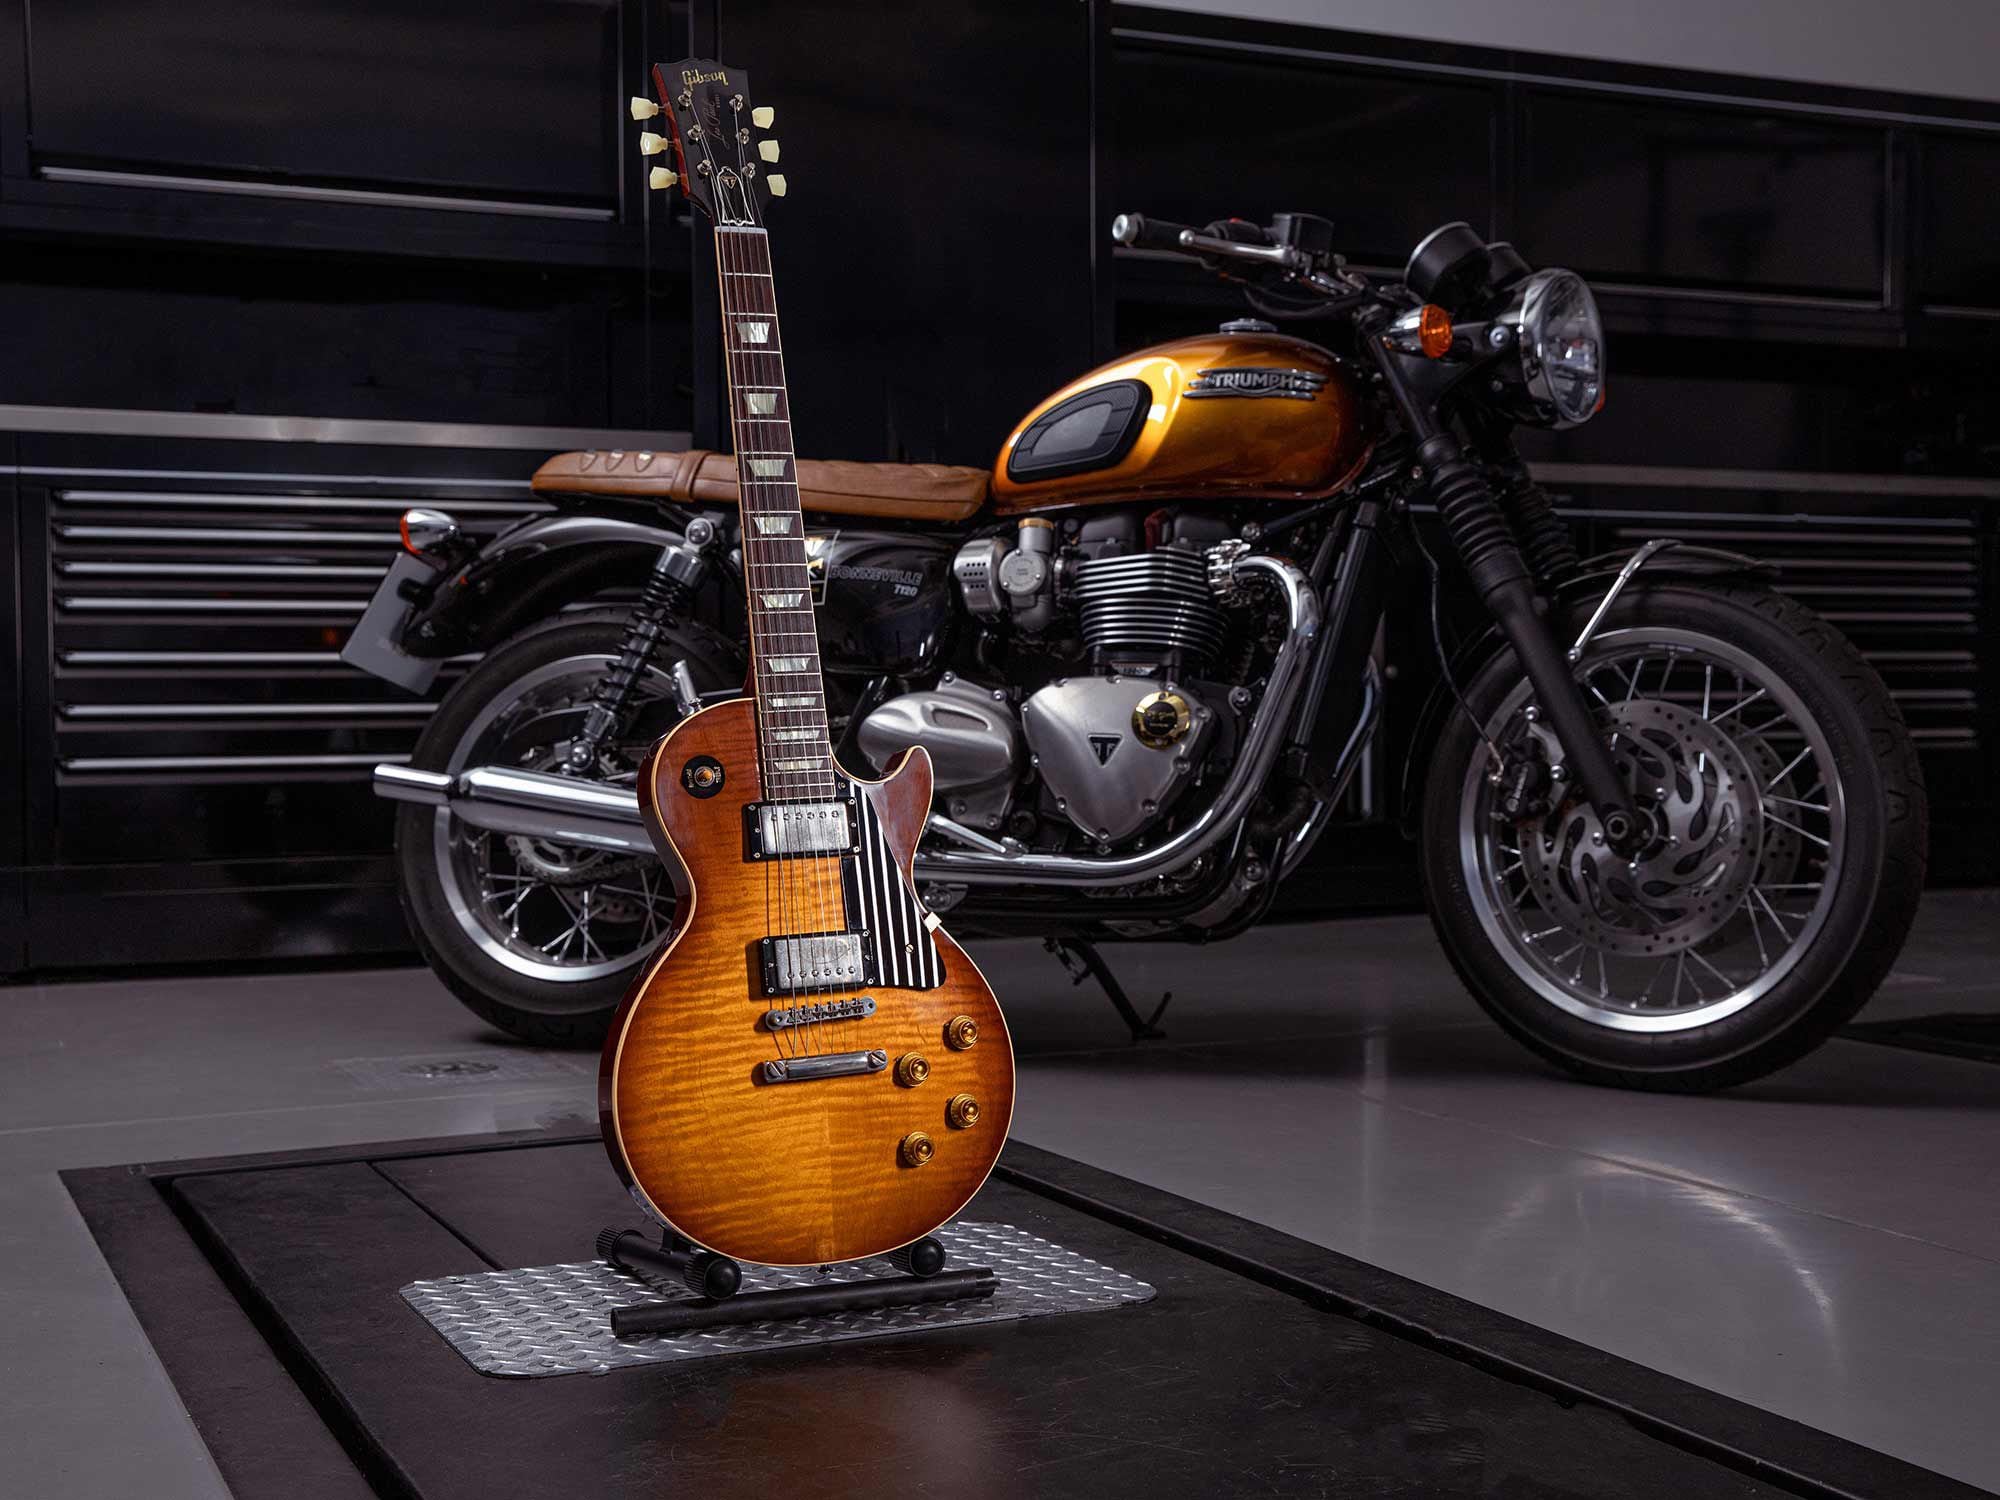 Now that’s worthy of a thousand words. The 1959 Gibson Les Paul Standard Reissue sits next to the custom Bonneville T120.